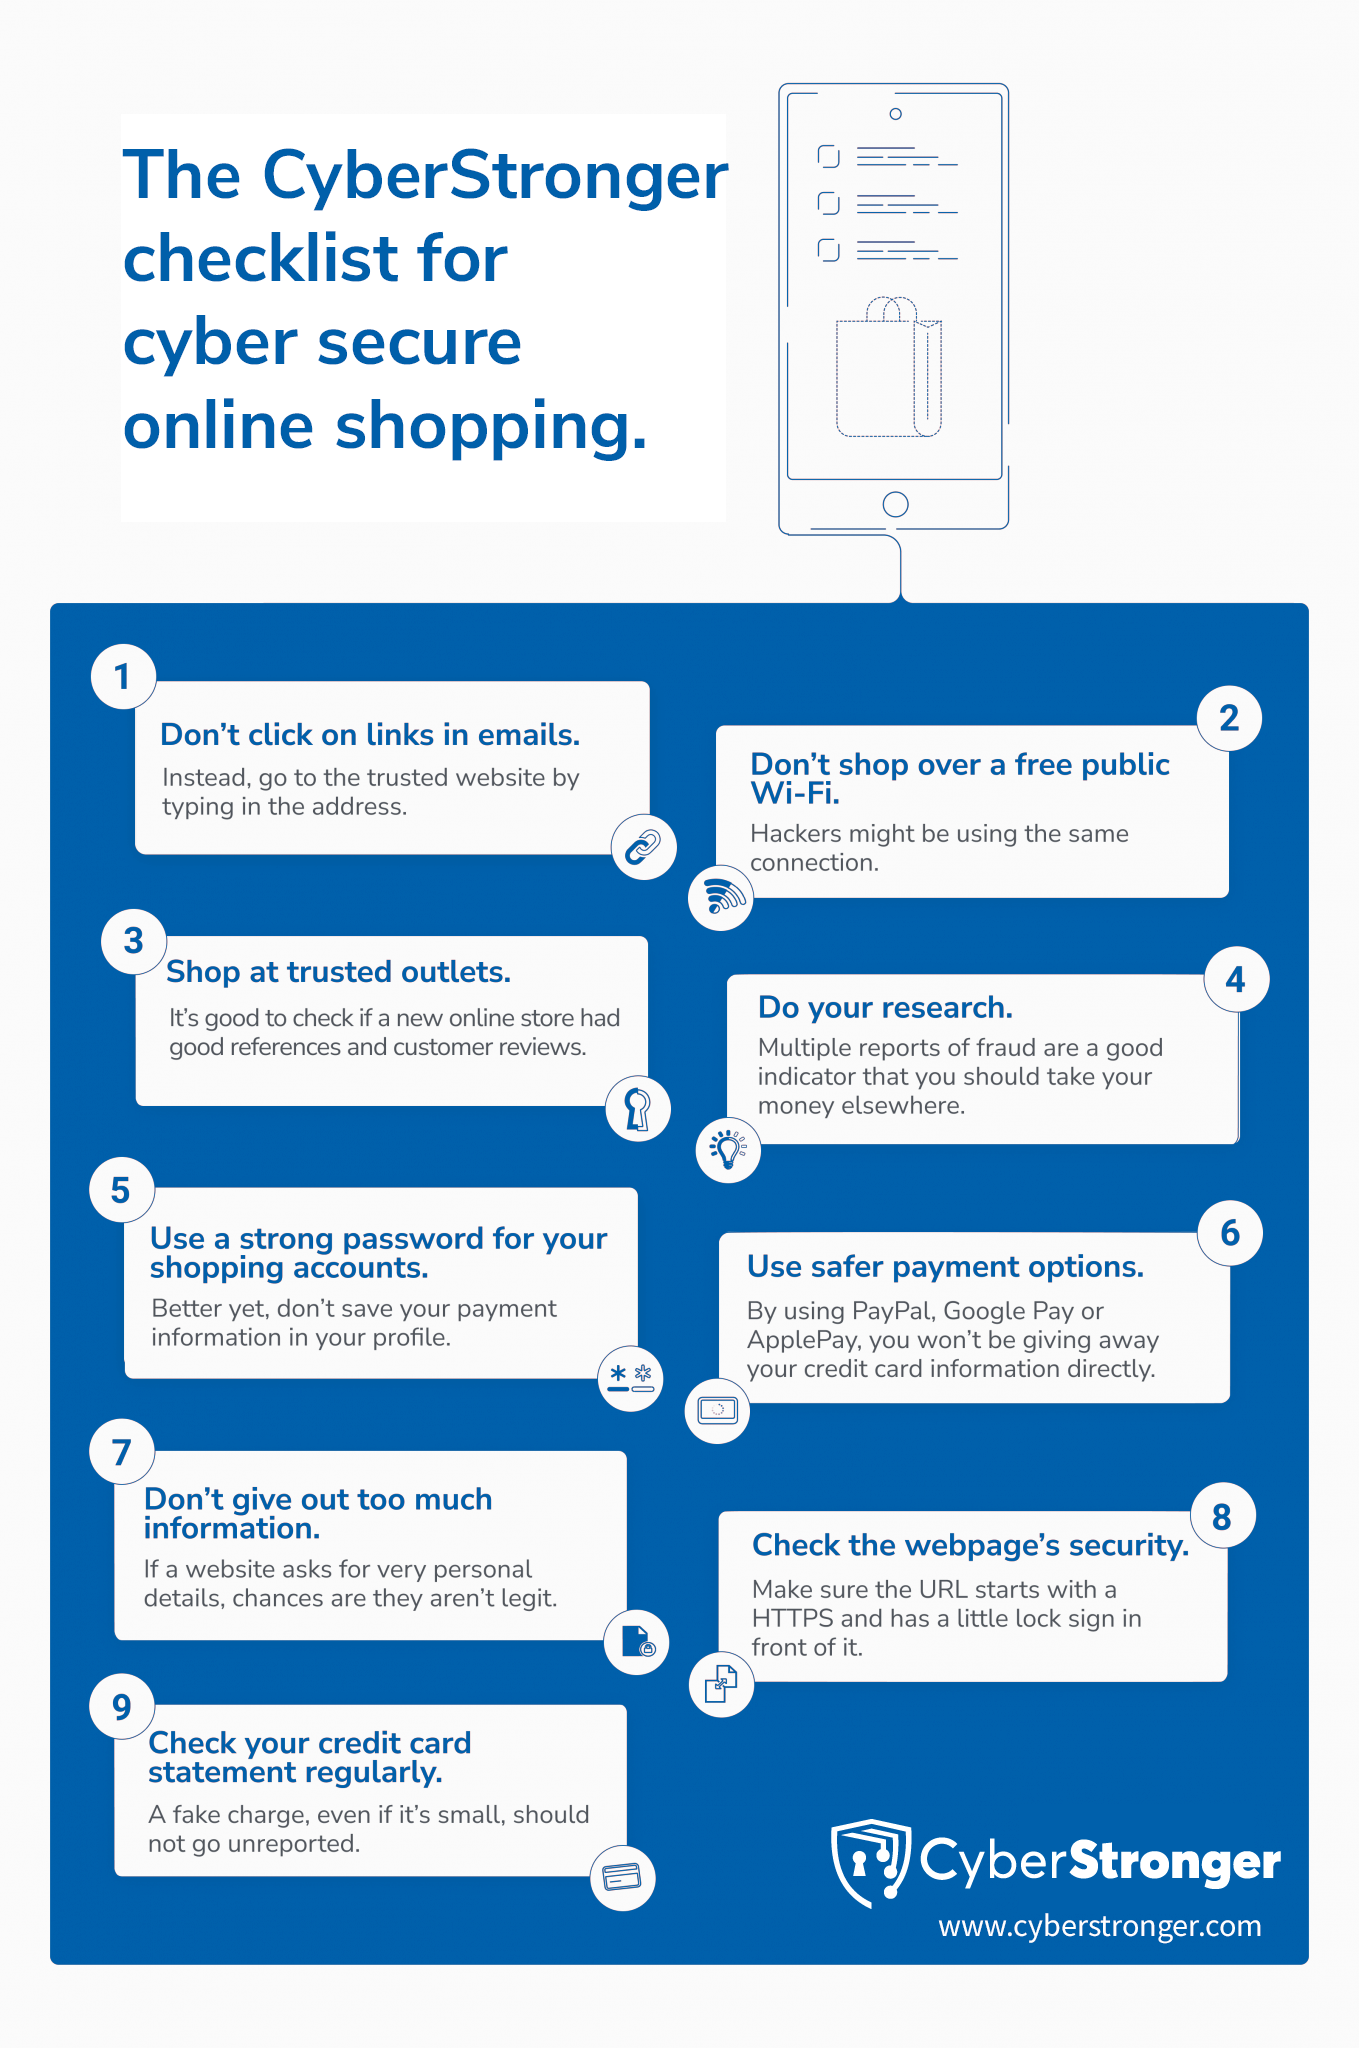 The CyberStronger checklist for cybersecure online shopping